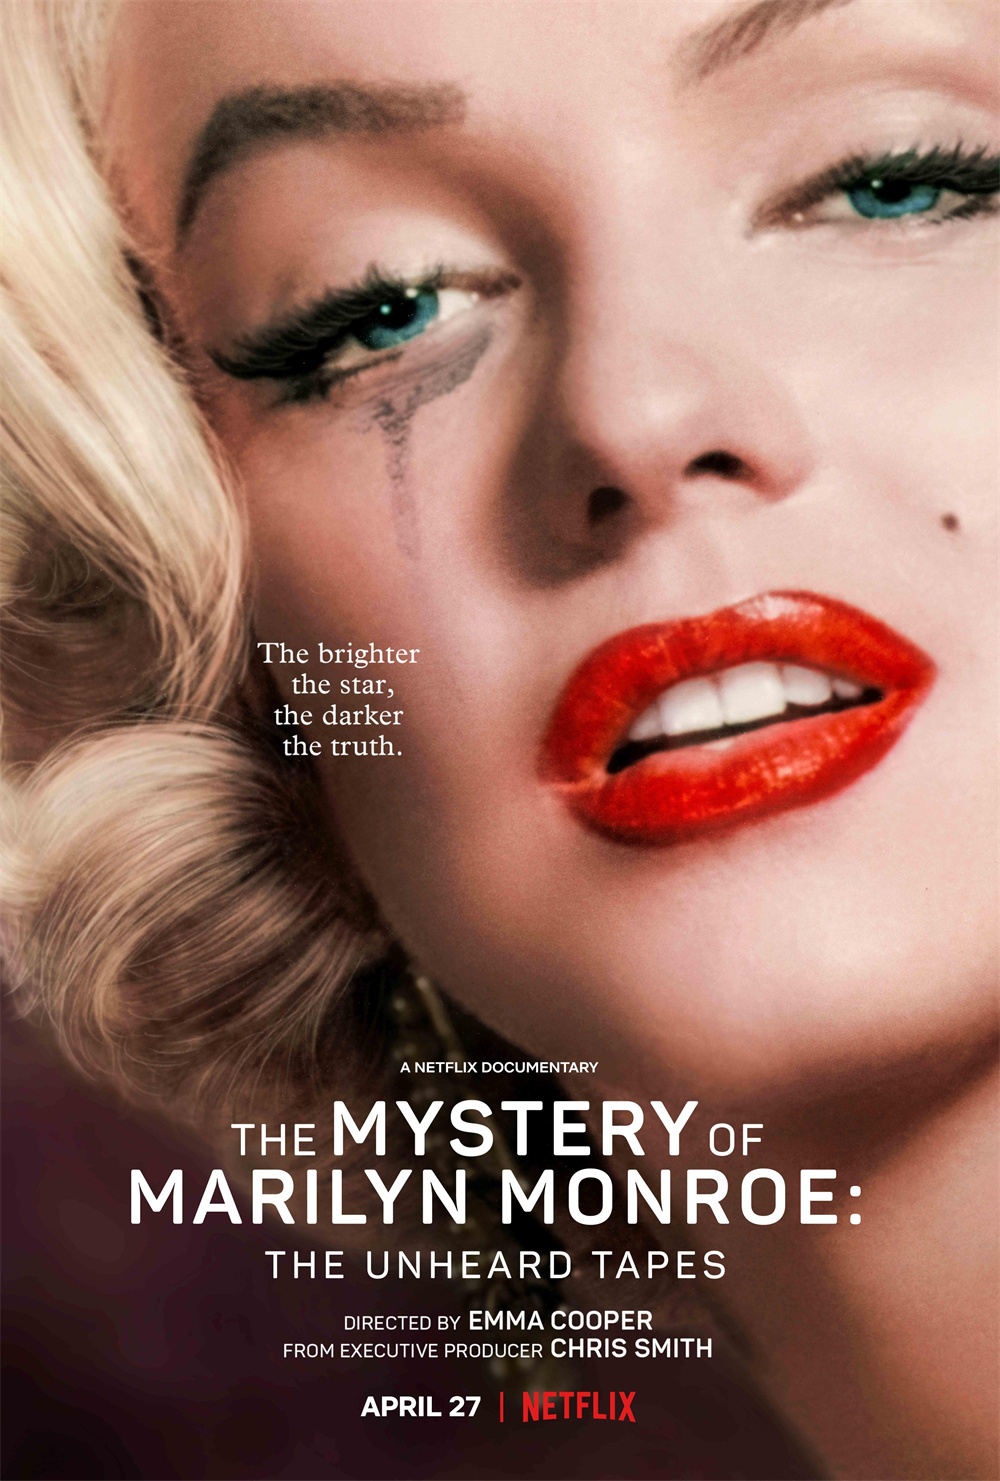 Netflix Documentary "The Mystery of Marilyn Monroe: The First Living Recordings"